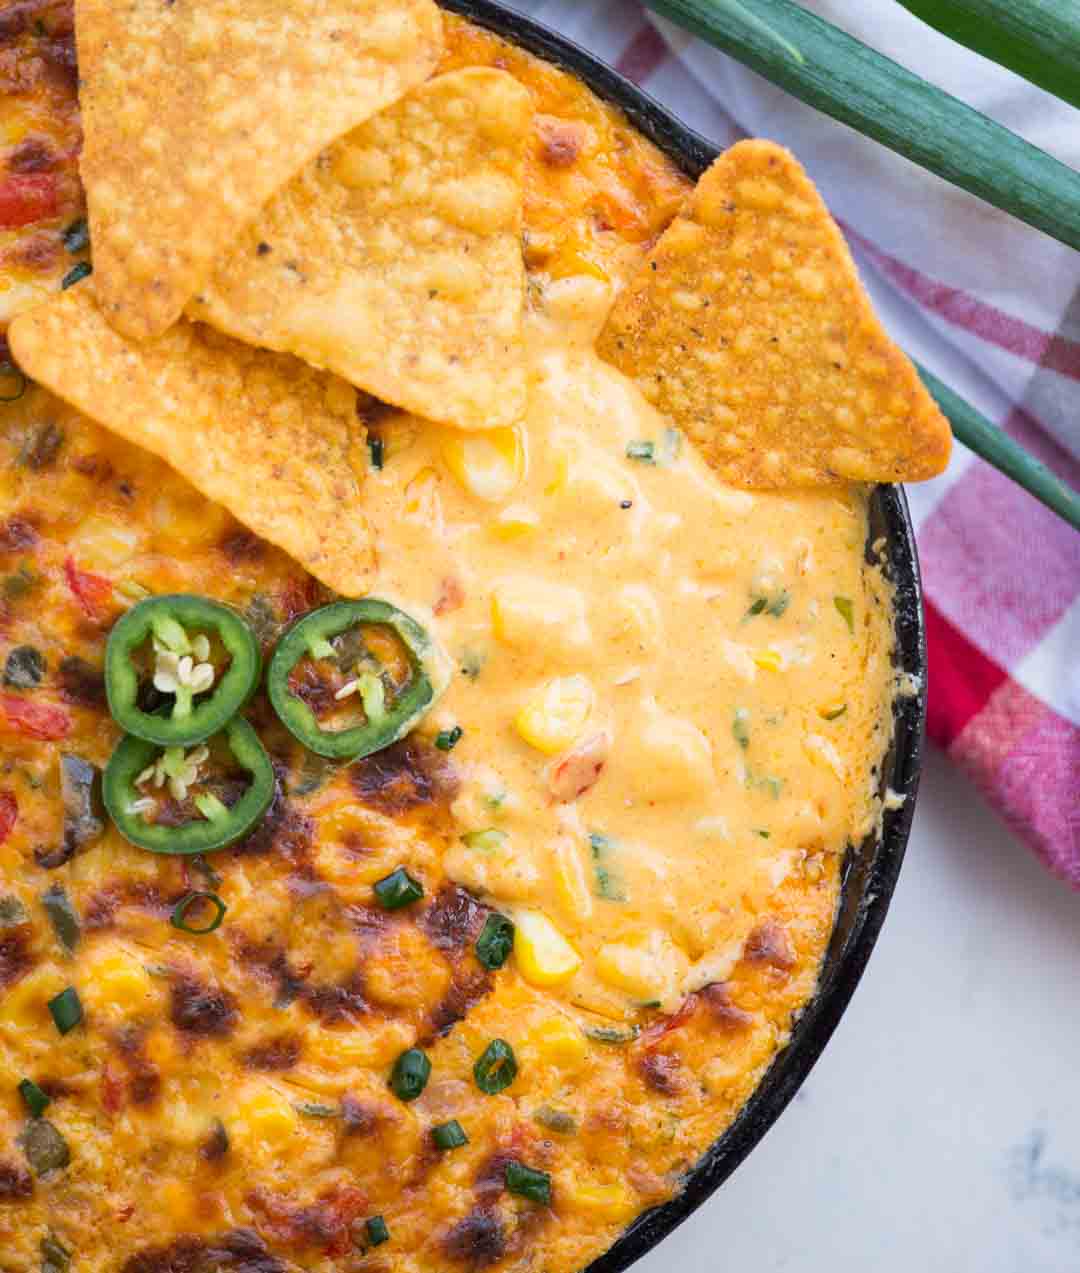 Corn dip made with mexican flavours has golden crust on top and nachos dipped into the cheesy creamy dip under the crust.